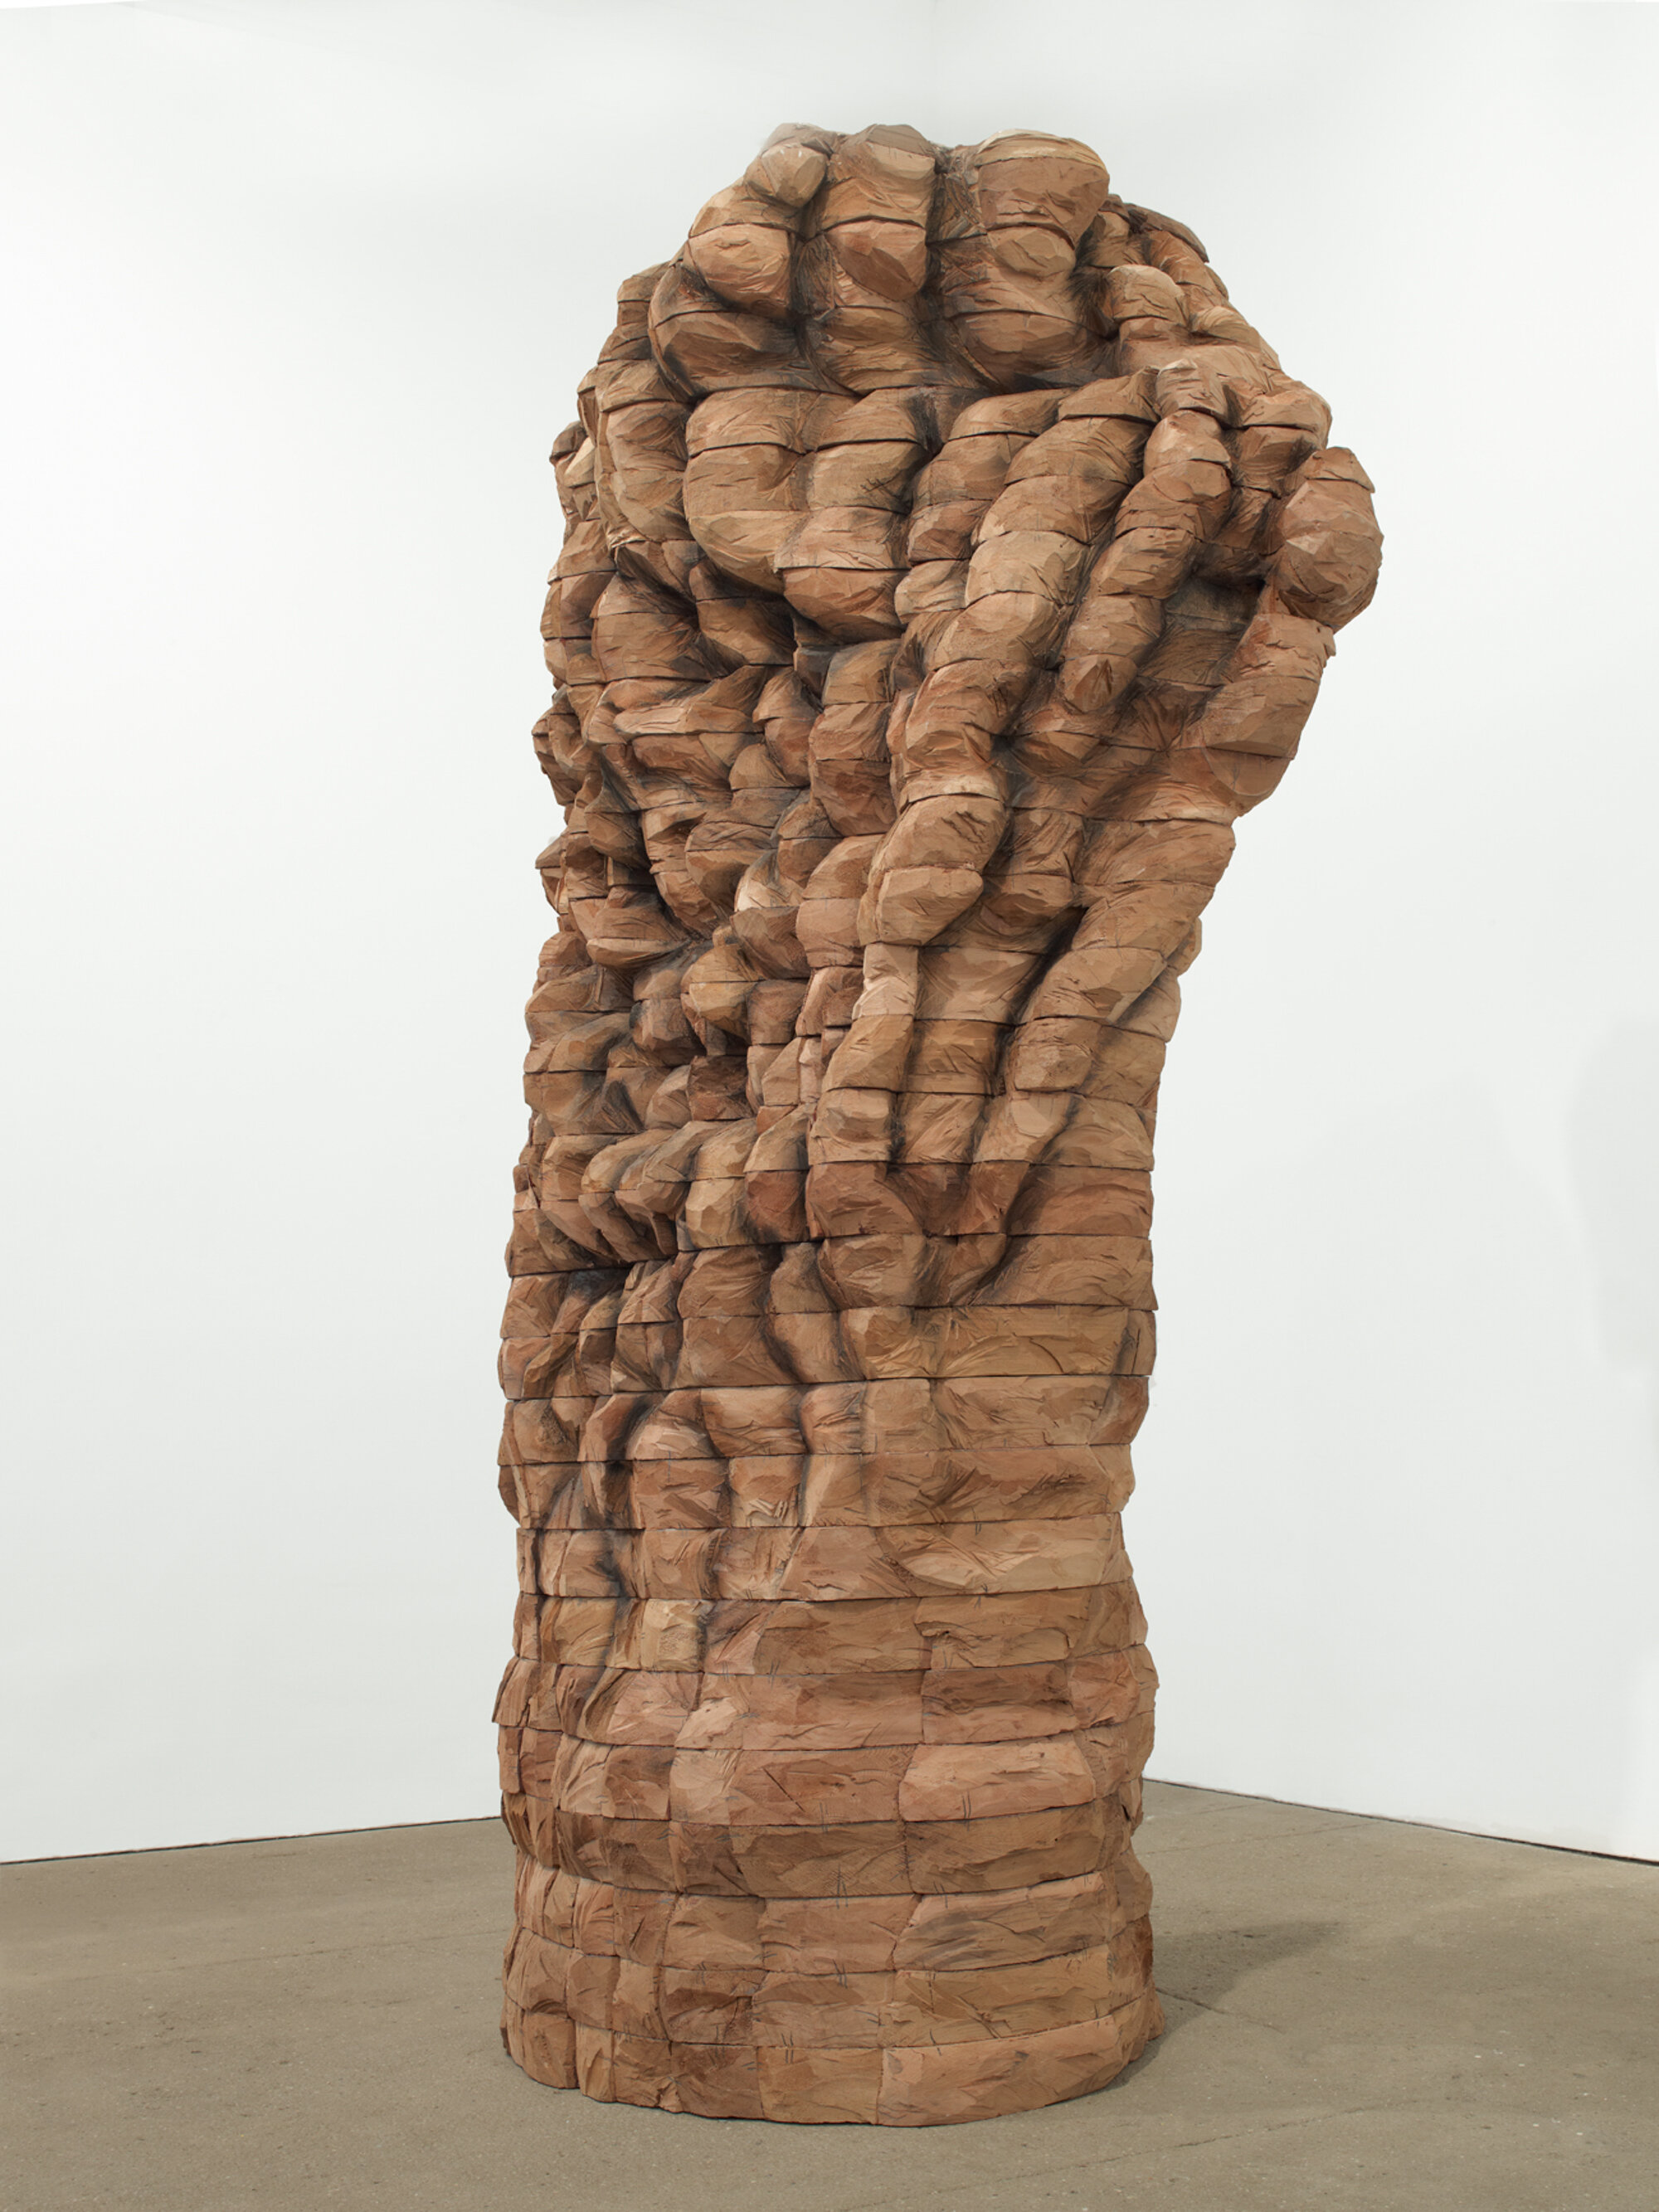       Moja , 2010 Cedar and graphite 102 x 49 x 44 in.    SCAD Museum of Art  